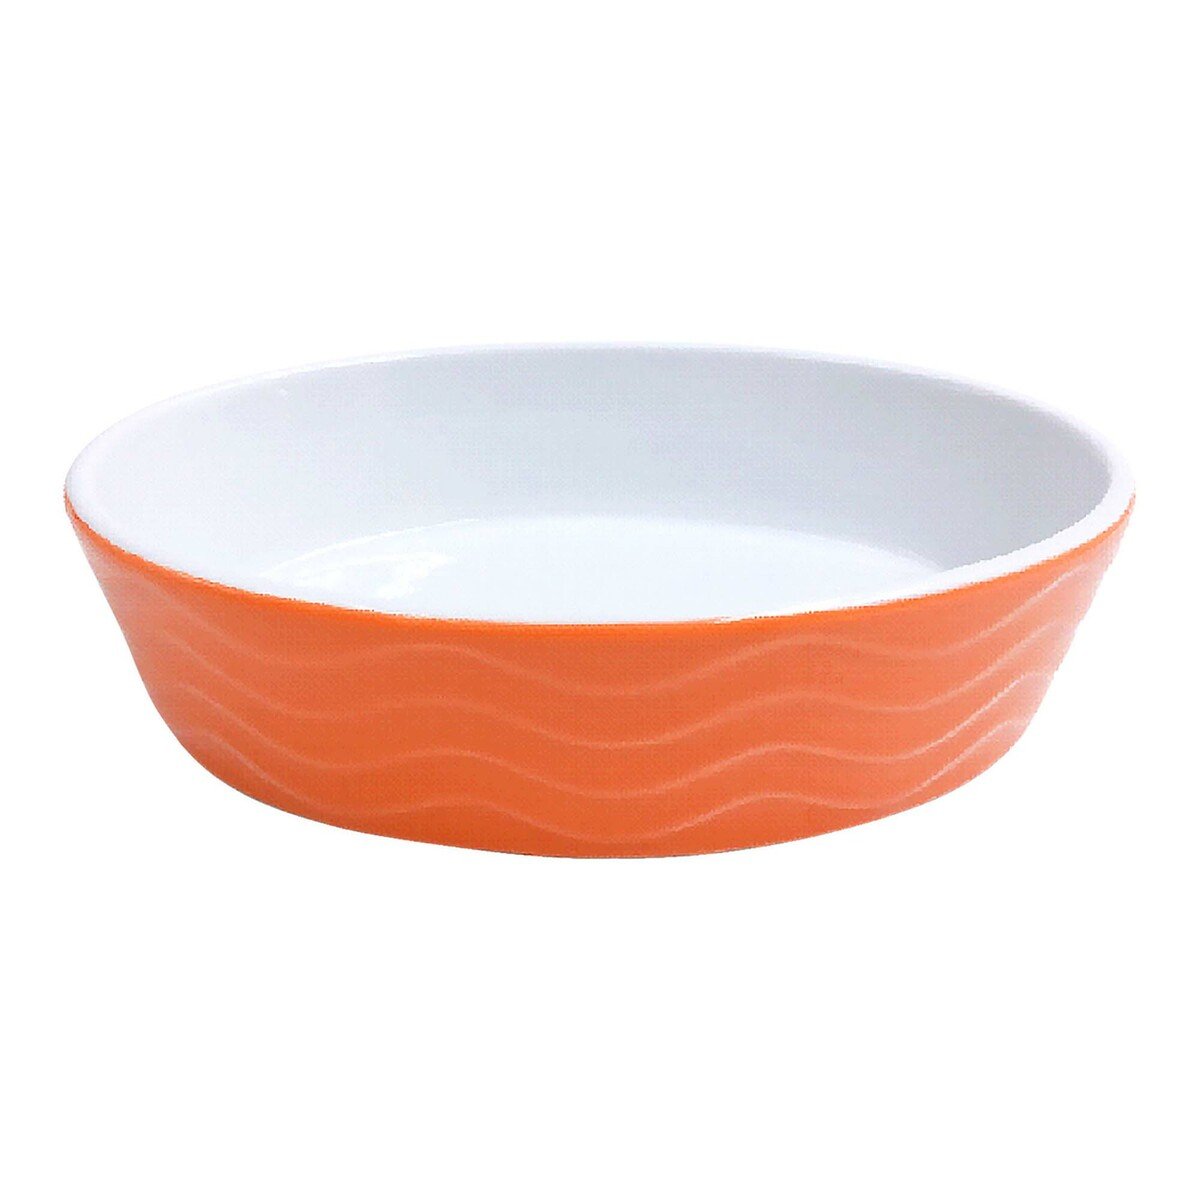 Home Oval Bakeware Plain 2965 1800ml Assorted Colors